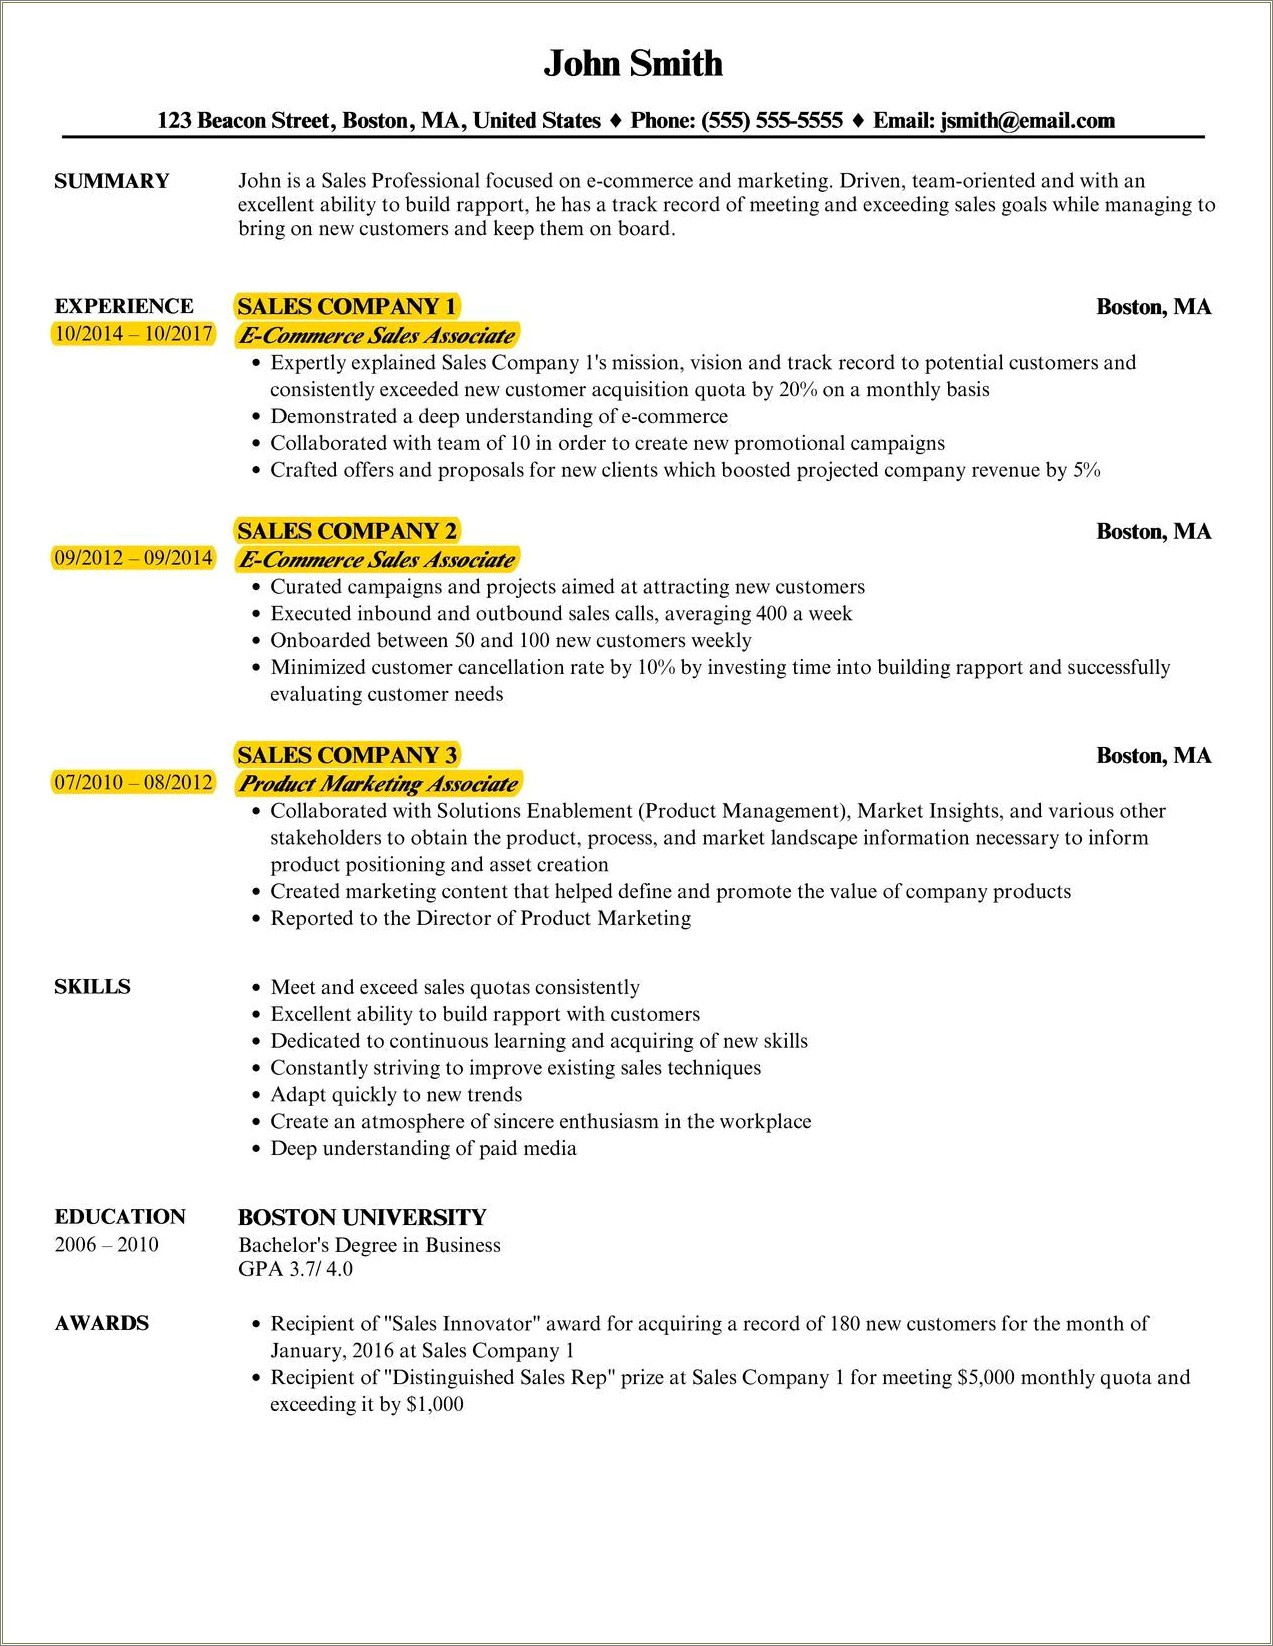 Where I Can Get Experience To Create Resume